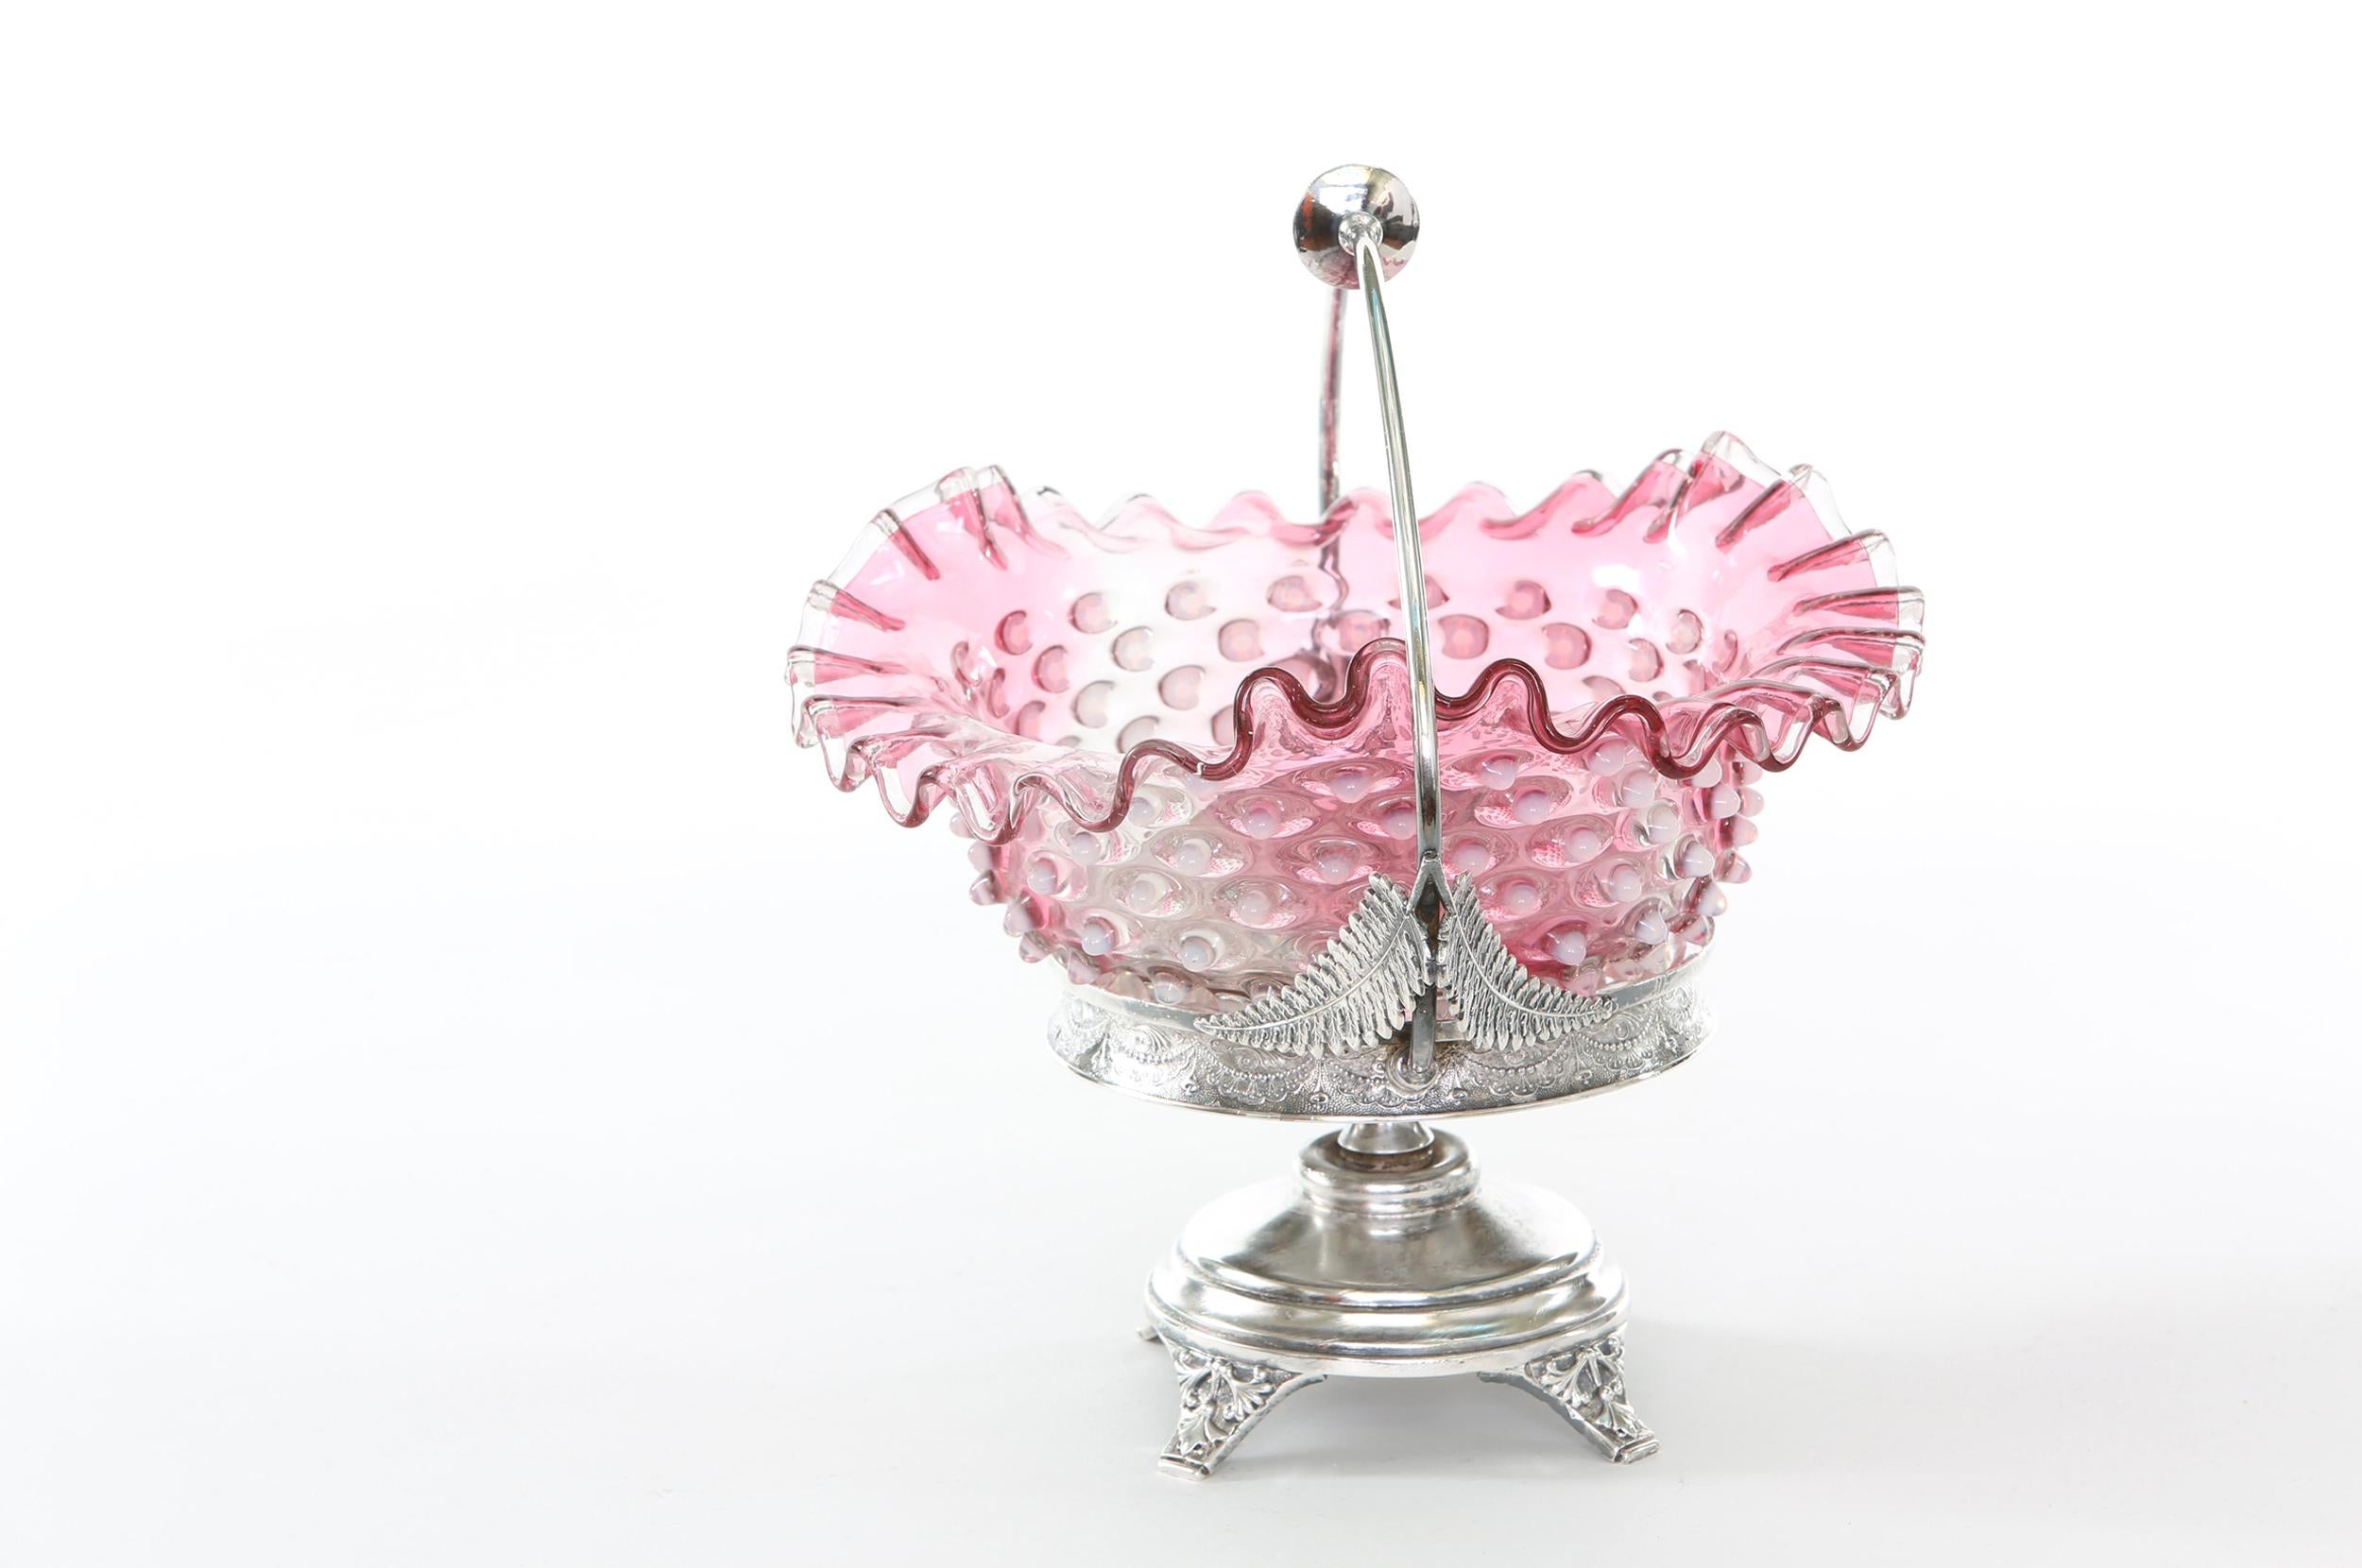 Silver plated framed holding base with foliate floral design details / pink crystal top brides basket. The brides basket is in great condition. Maker's mark undersigned. The piece stands about 11